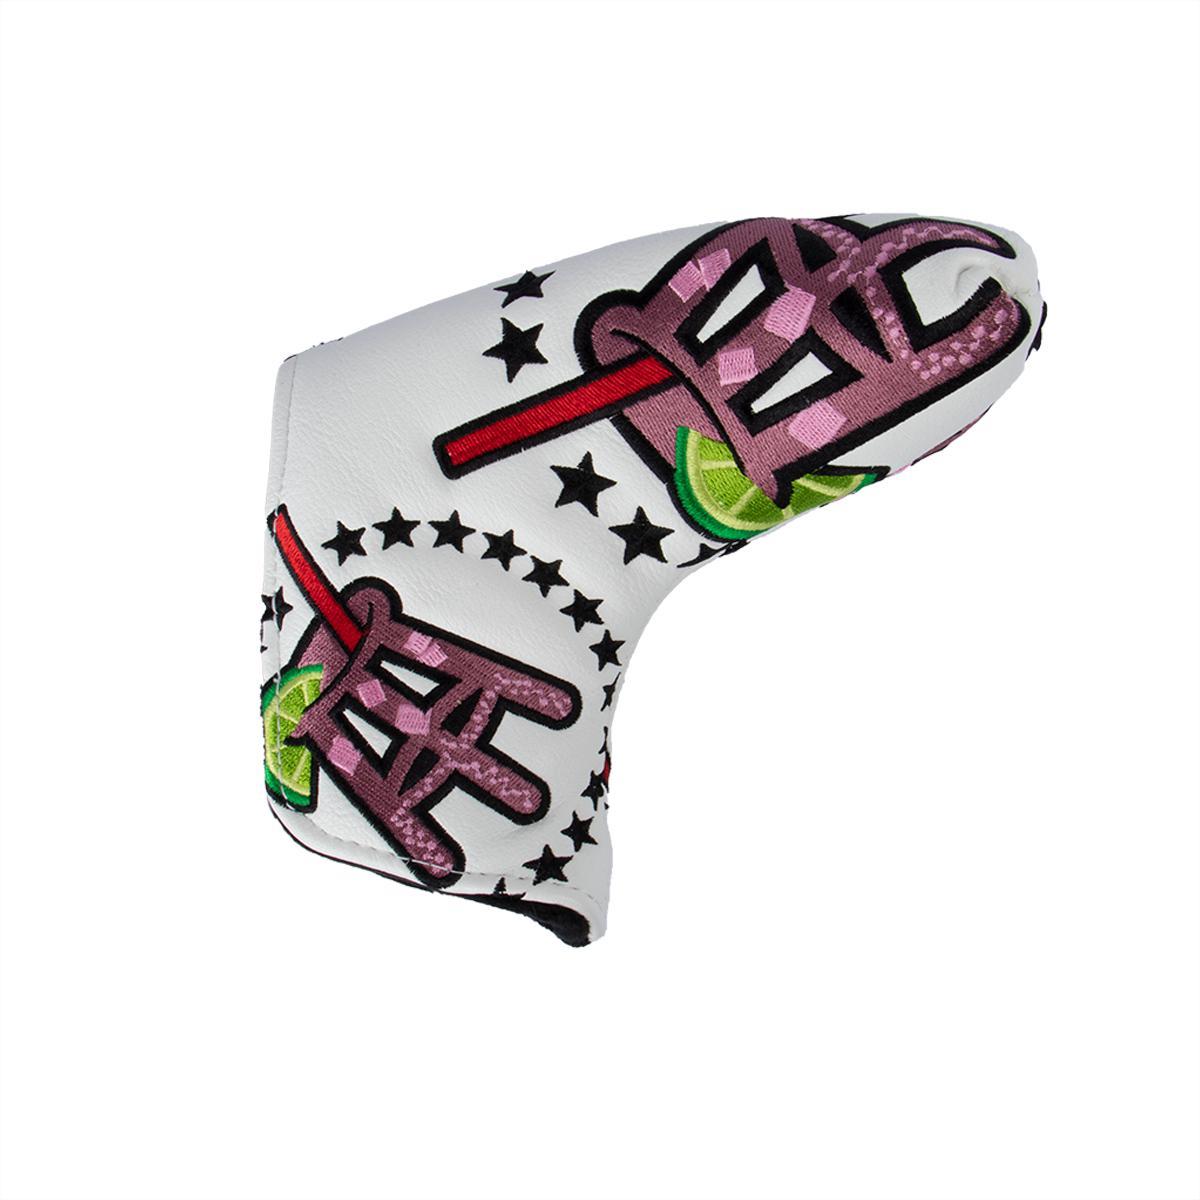 Transfusion Blade Putter Cover